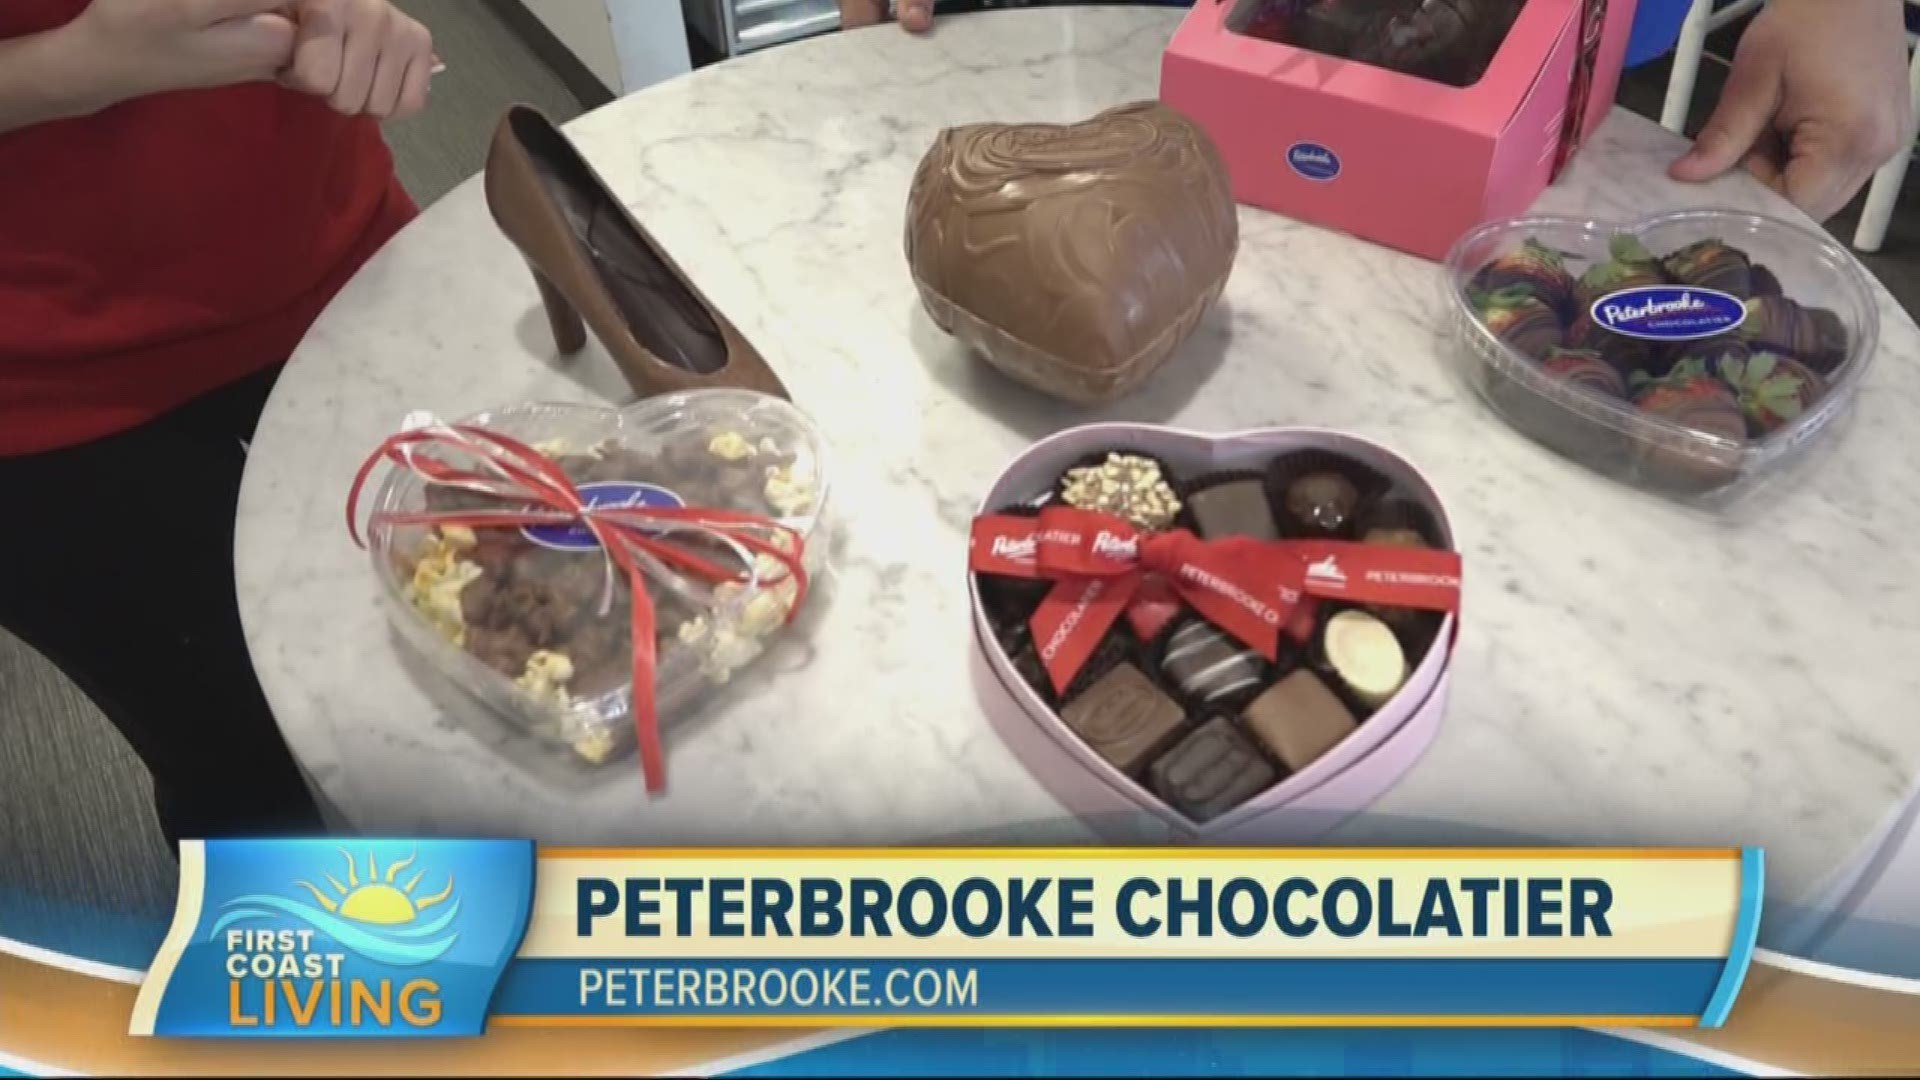 You can never go wrong with chocolate when it comes to sweets for Valentine's Day.